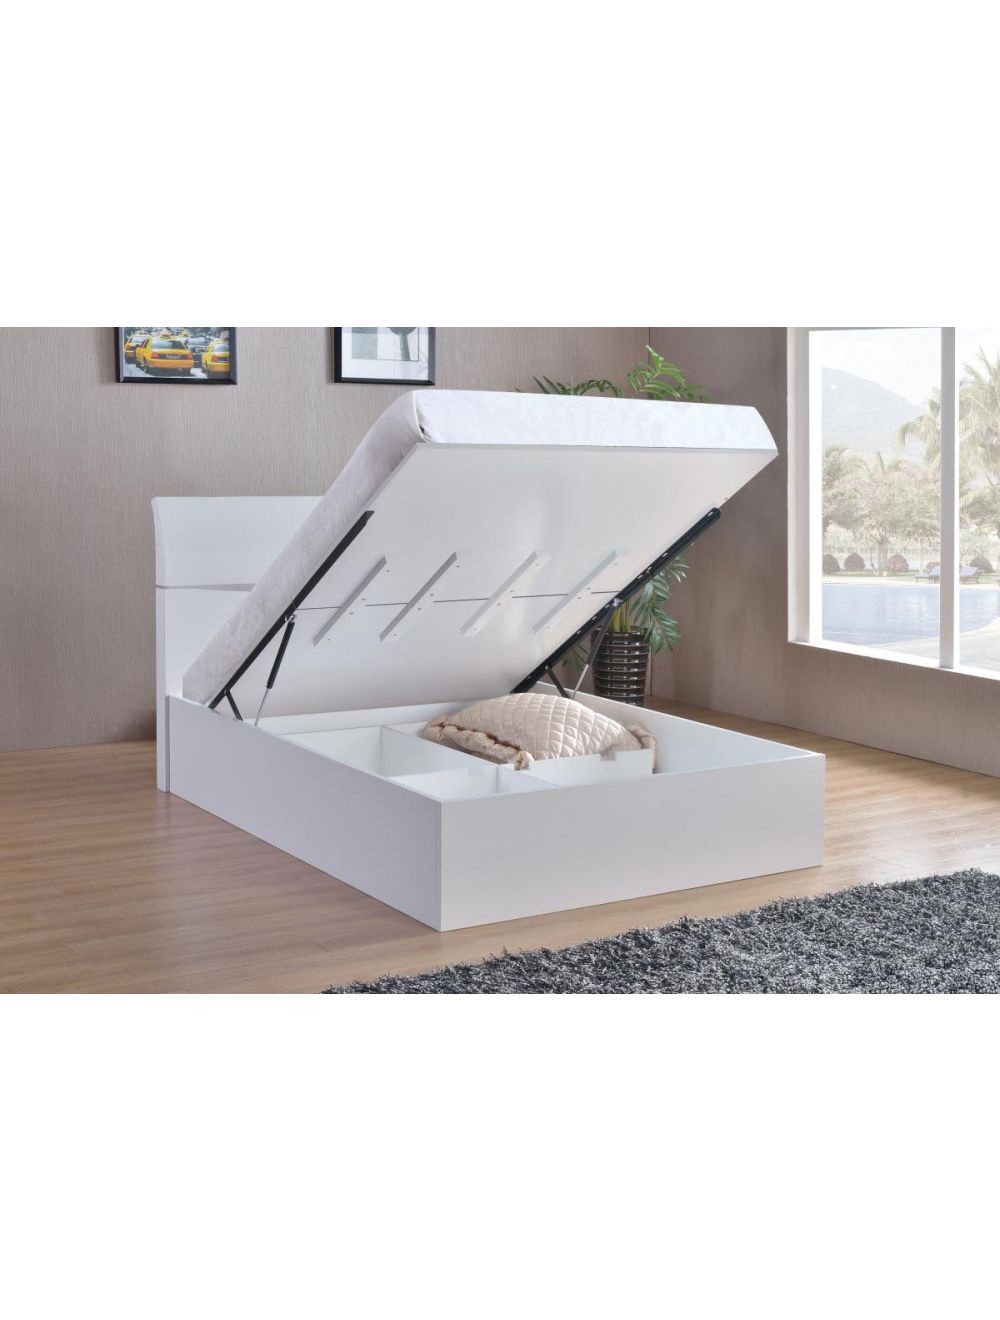 Arden White High Gloss Double Storage Bed, White Gloss Bed Frame With Storage